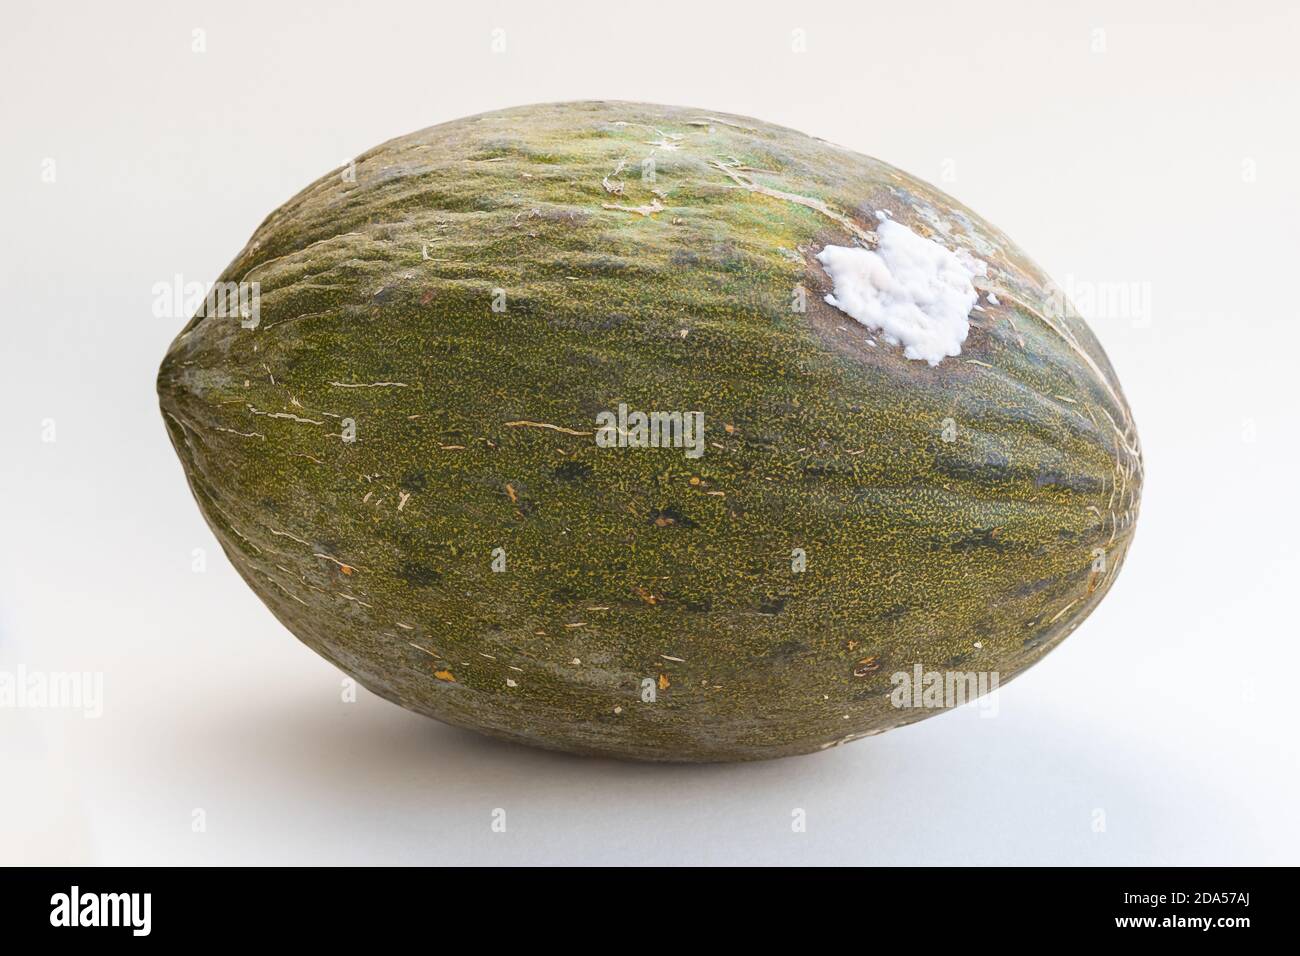 Rotten Santa Claus melon, sometimes known as Christmas melon or Piel de Sapo or Toad Skin, a variety of green melon from Spain Stock Photo